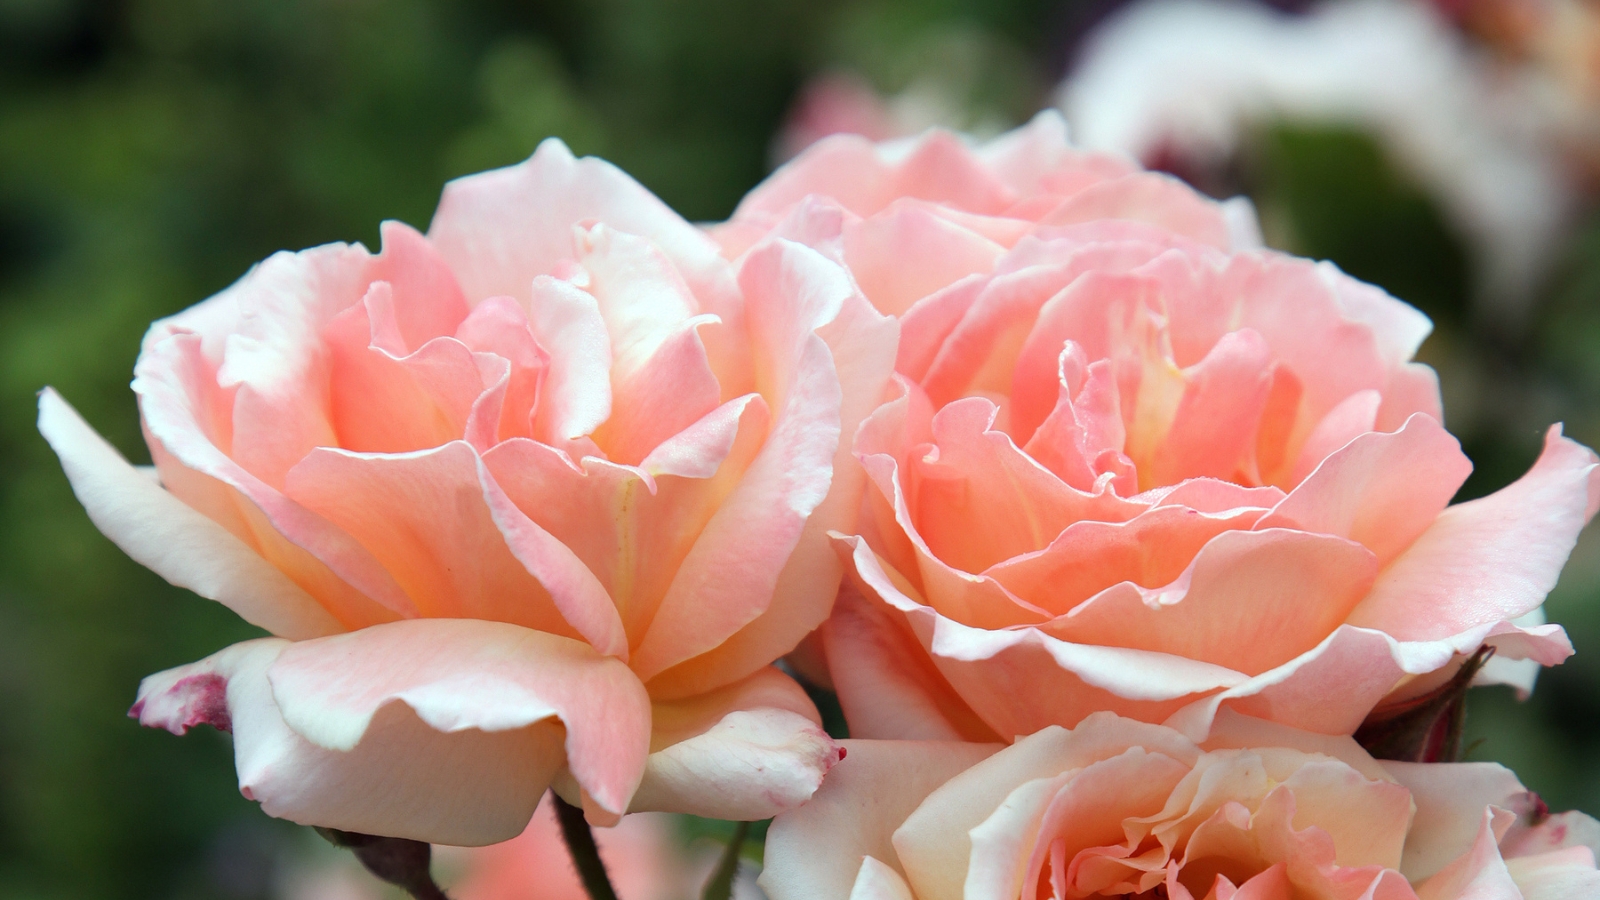 A close-up reveals delicate, soft pink 'Mother of Pearl' roses, their petals unfurling gracefully, capturing the gentle light with subtle iridescence